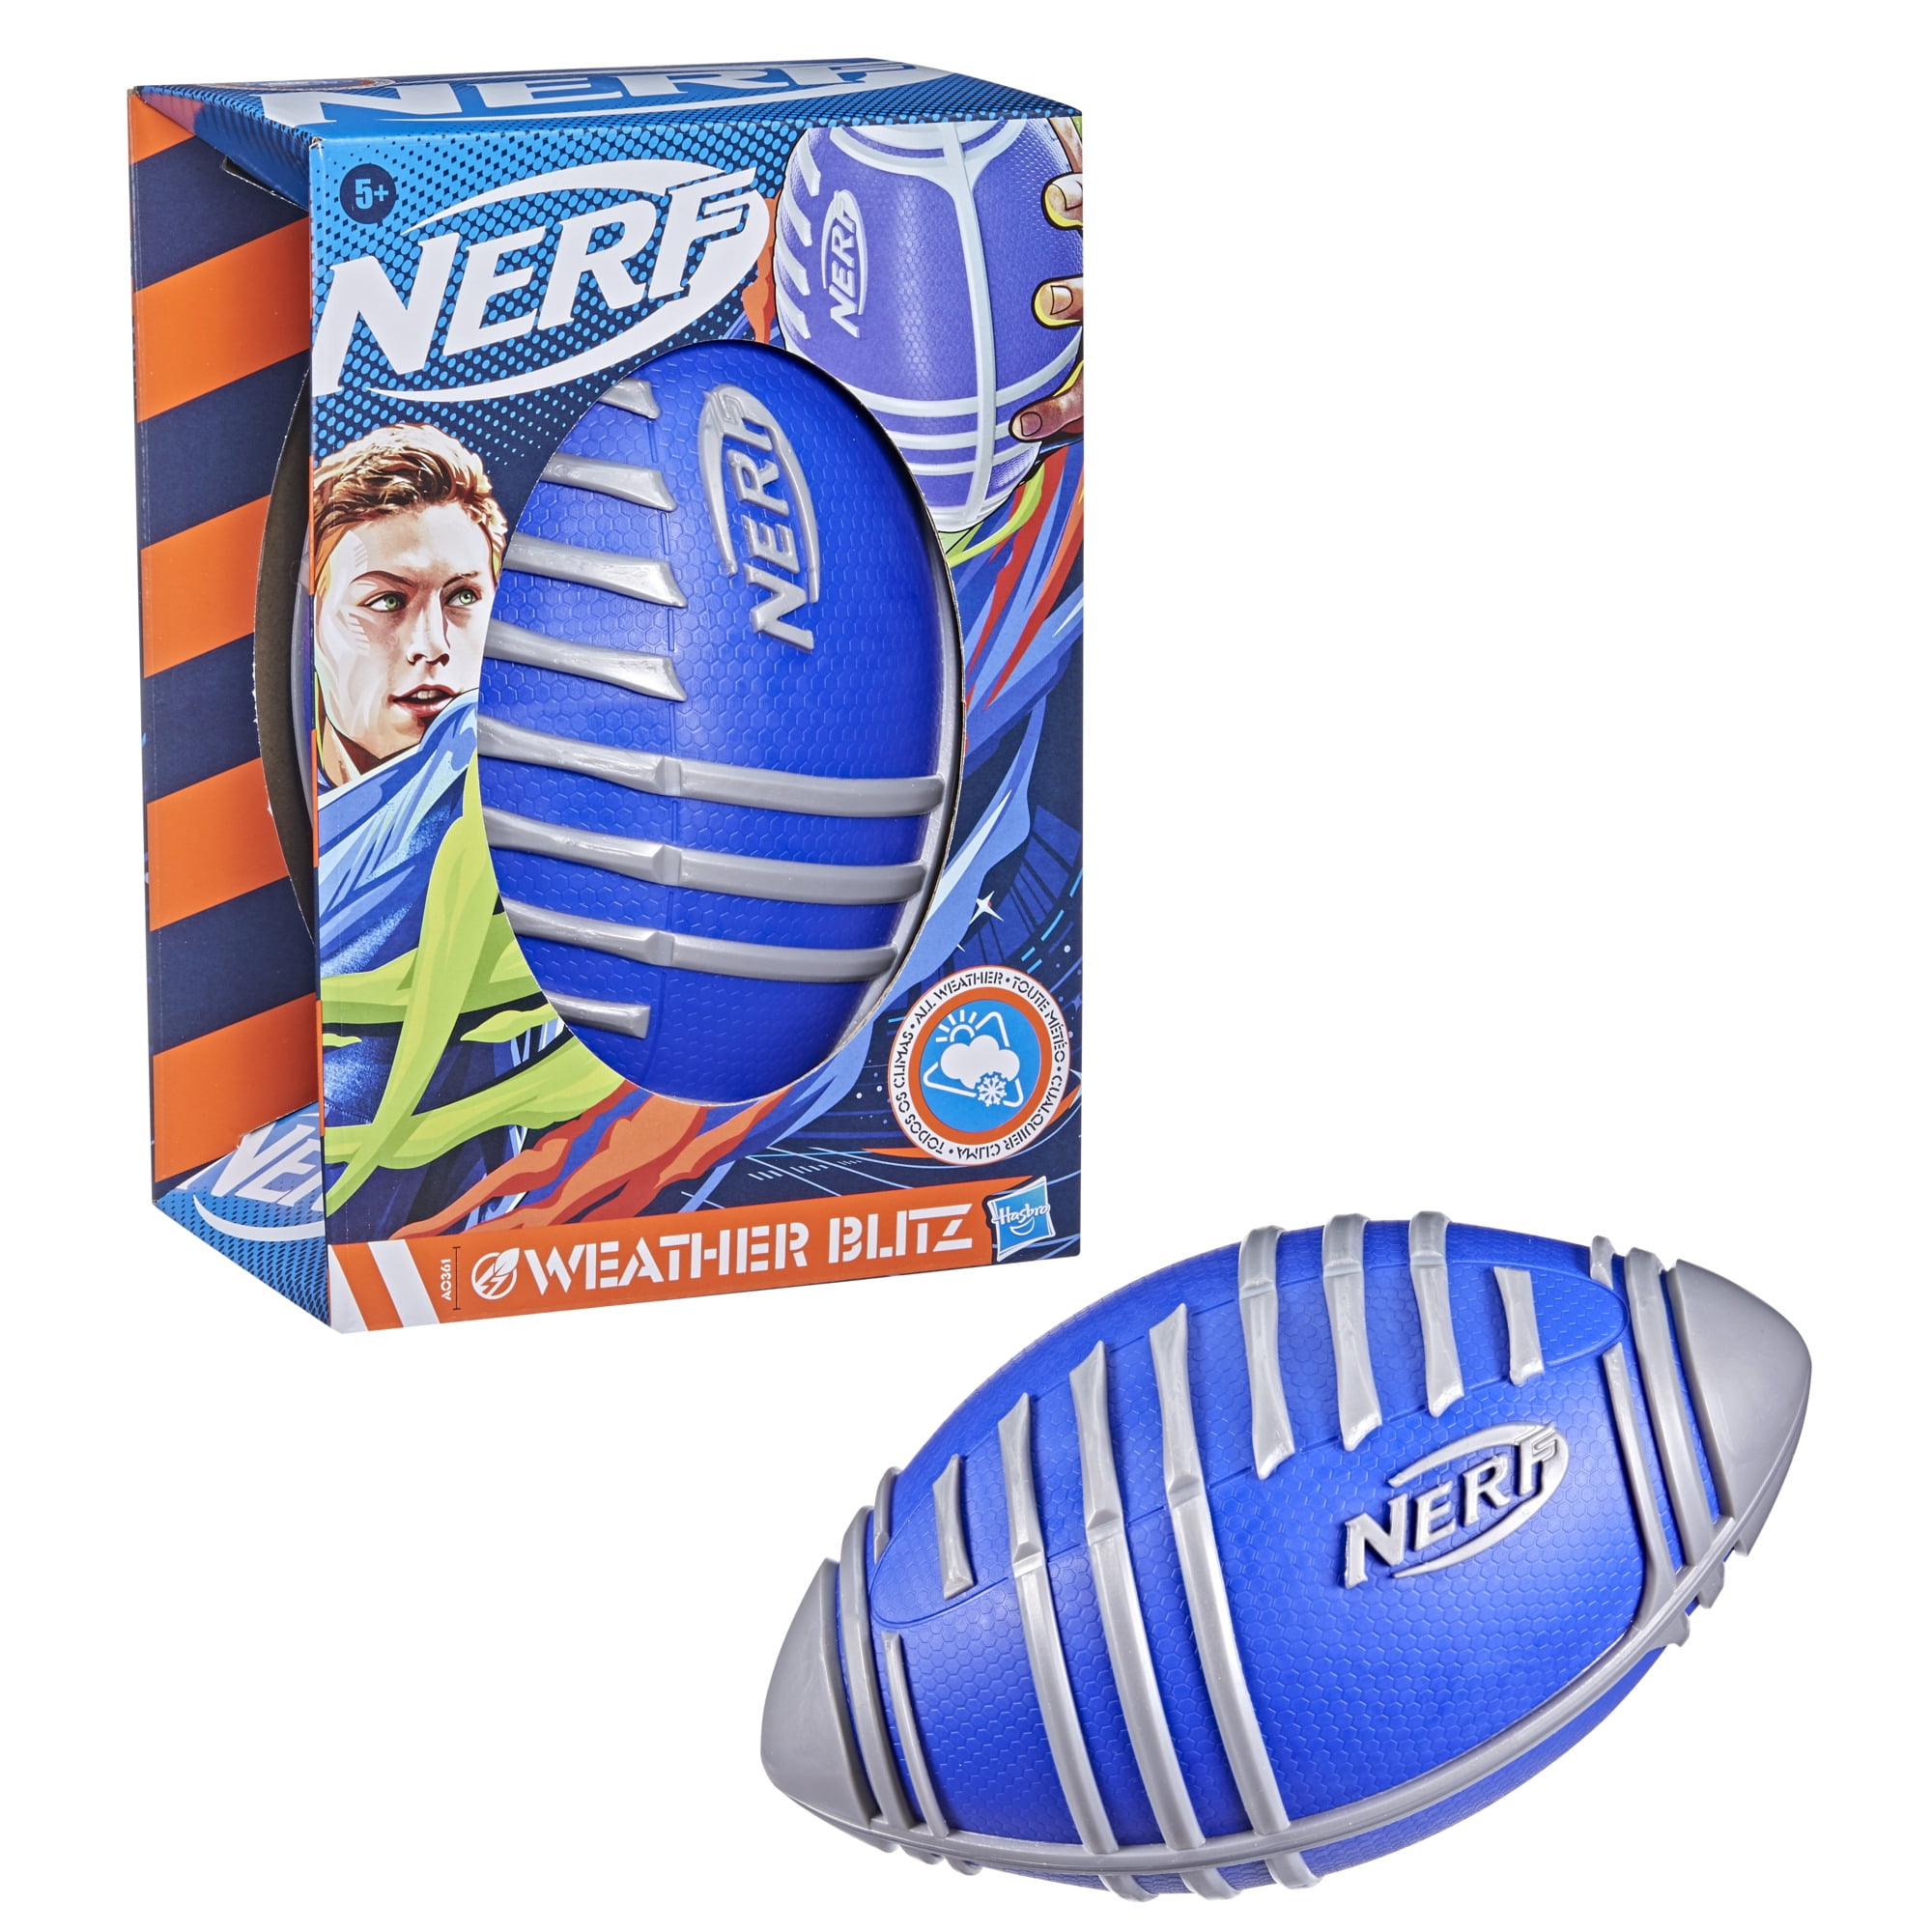 Nerf Vortex Ultra Grip Football, Designed for Easy Catching